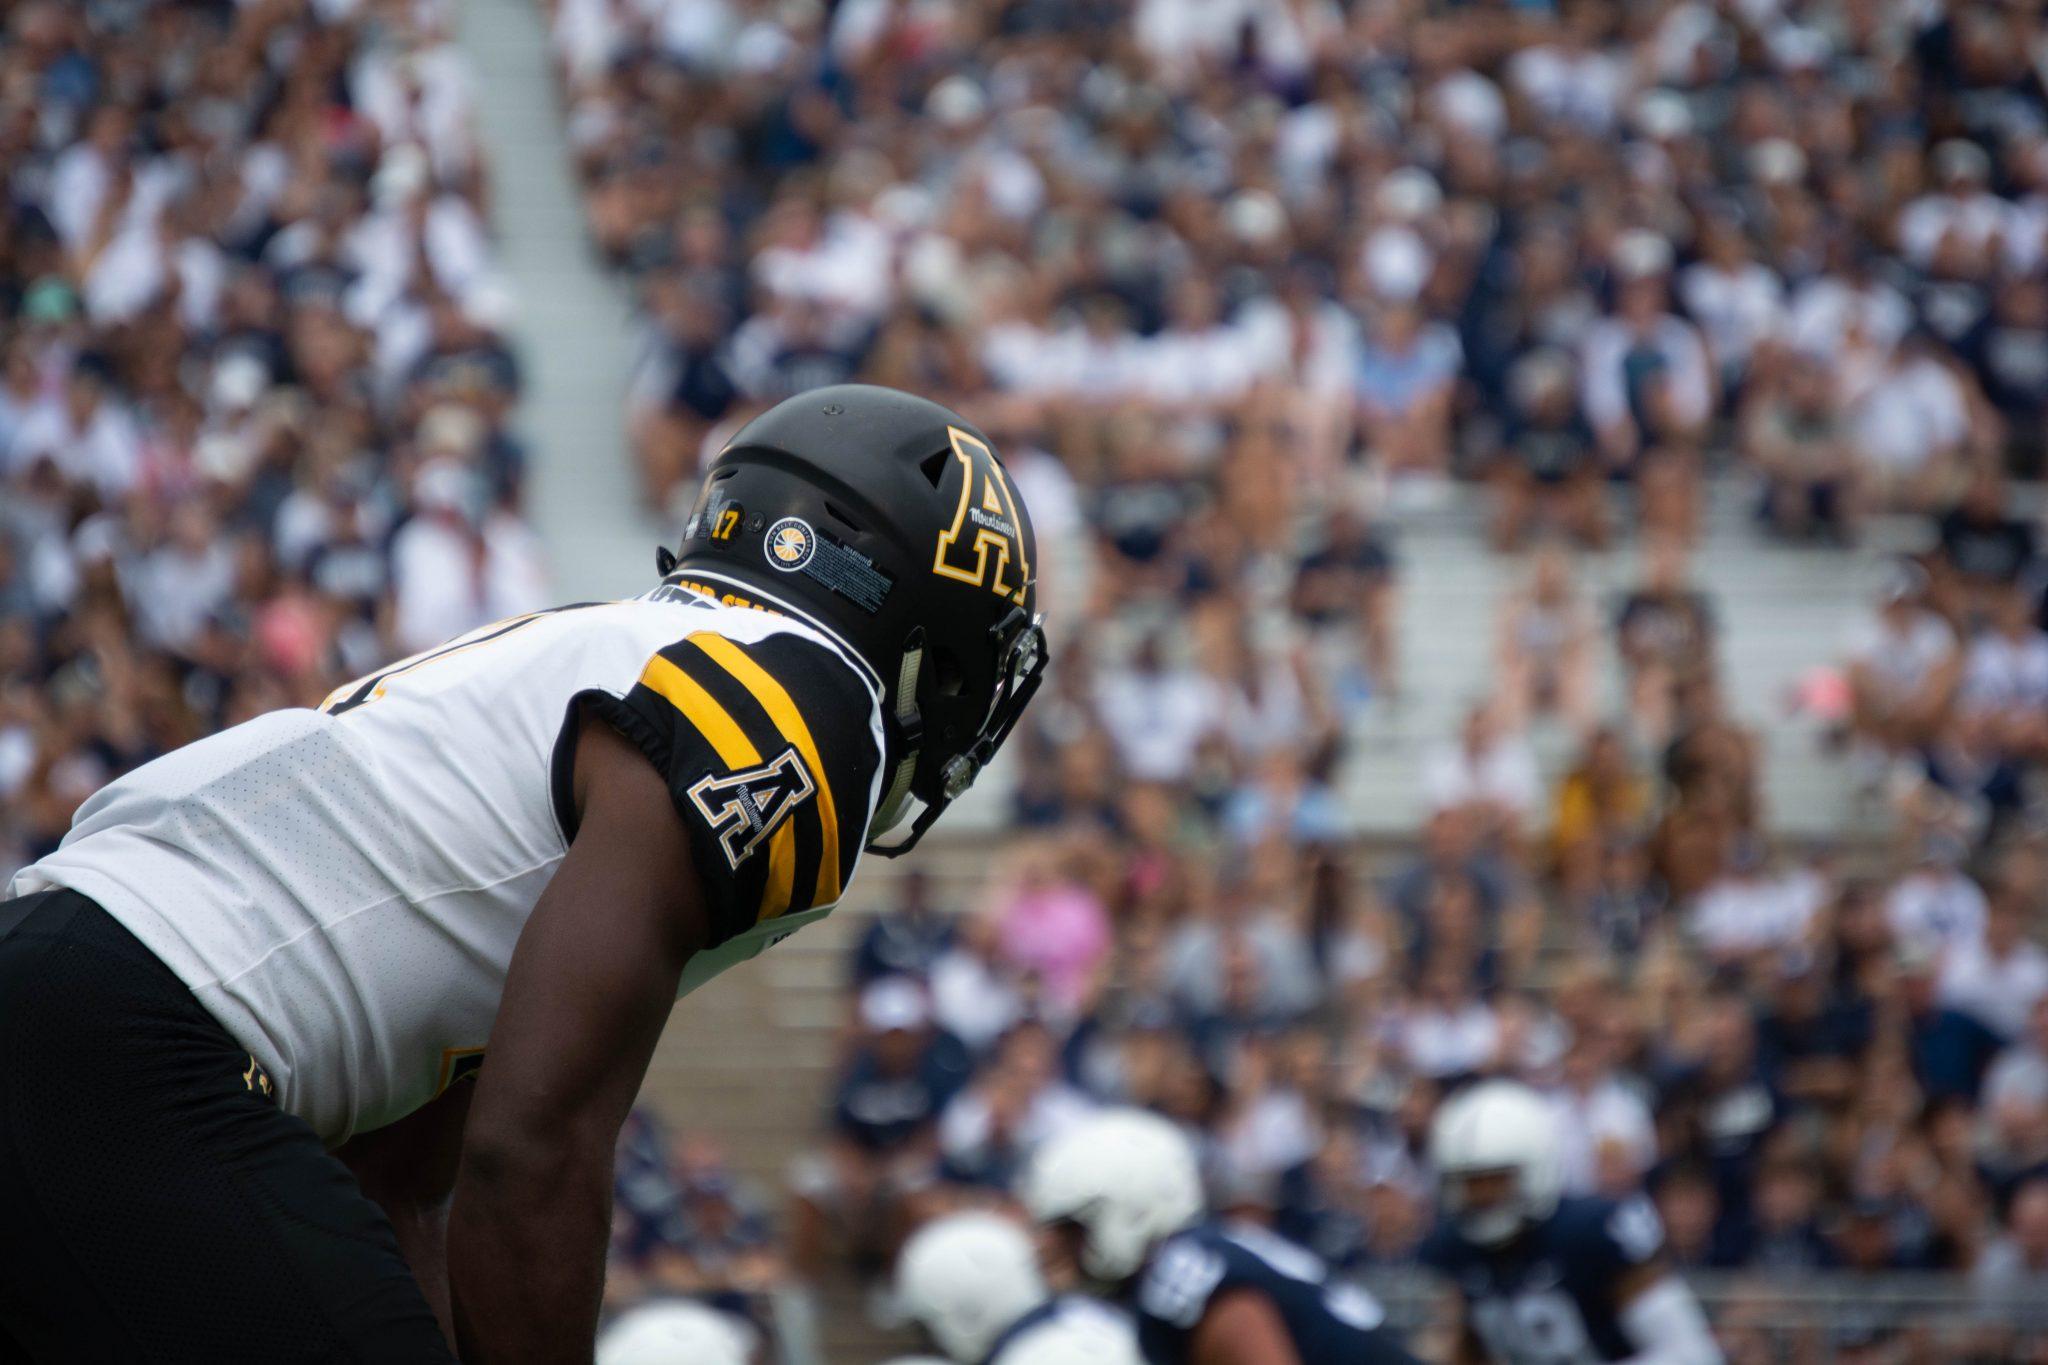 Senior cornerback Tae Hayes gets ready for the next play against Penn State. App State lost to the Nittany Lions 45-38.